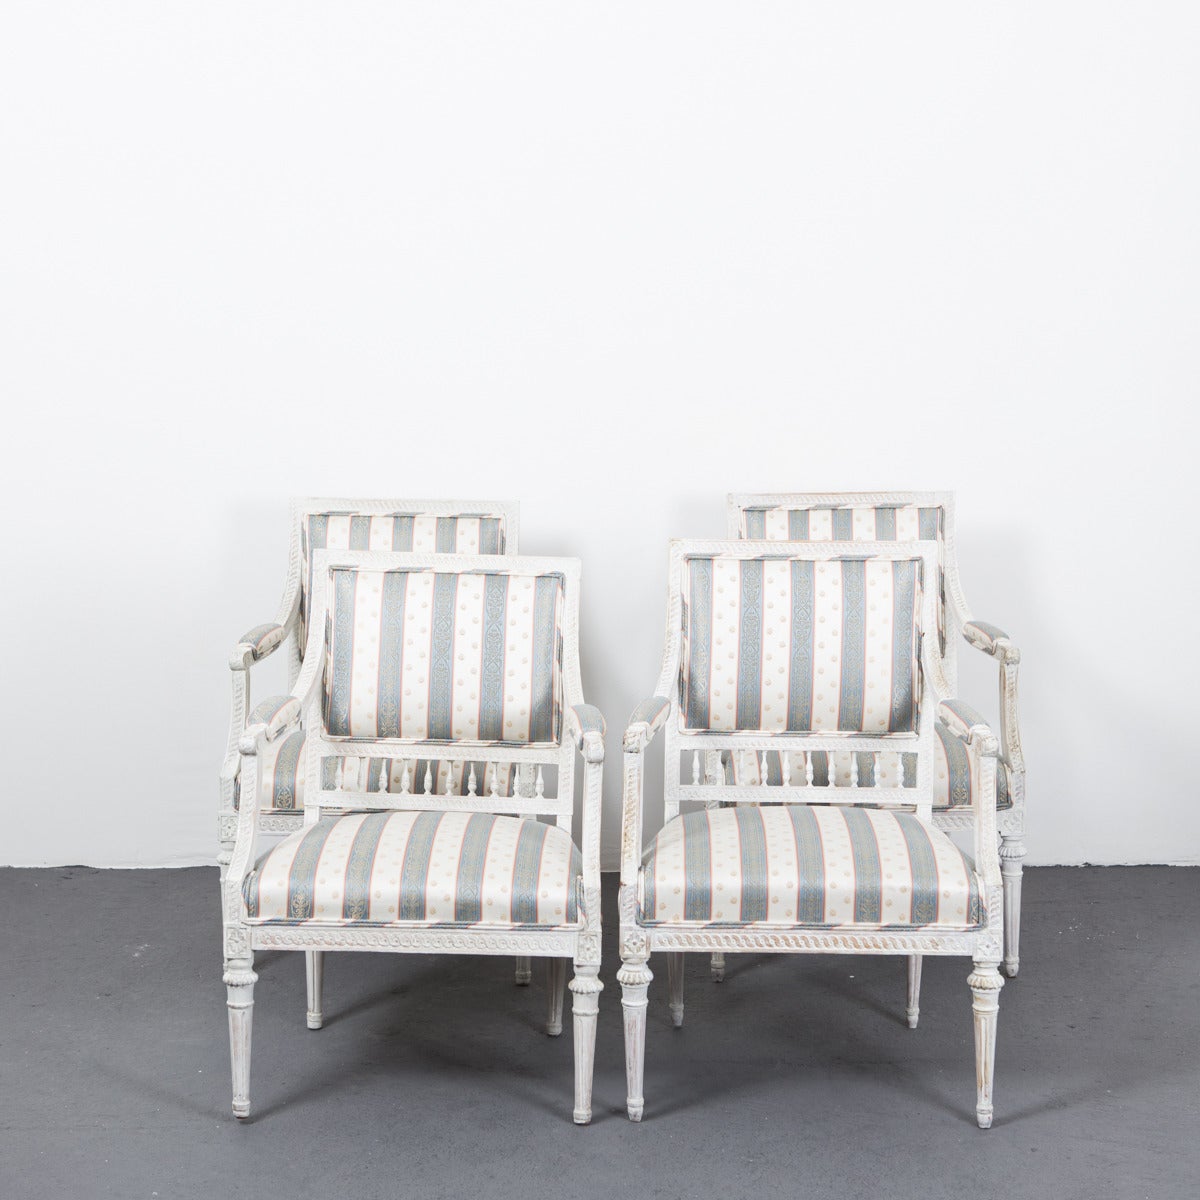 Armchairs set of four Swedish Gustavian period signed Johan Lindgren, Sweden. A set of four Gustavian armchairs in a very good condition and quality. Two of the four are signed I L G for Johan Lindgren. Johan Lindgren was a chair maker in Sweden,